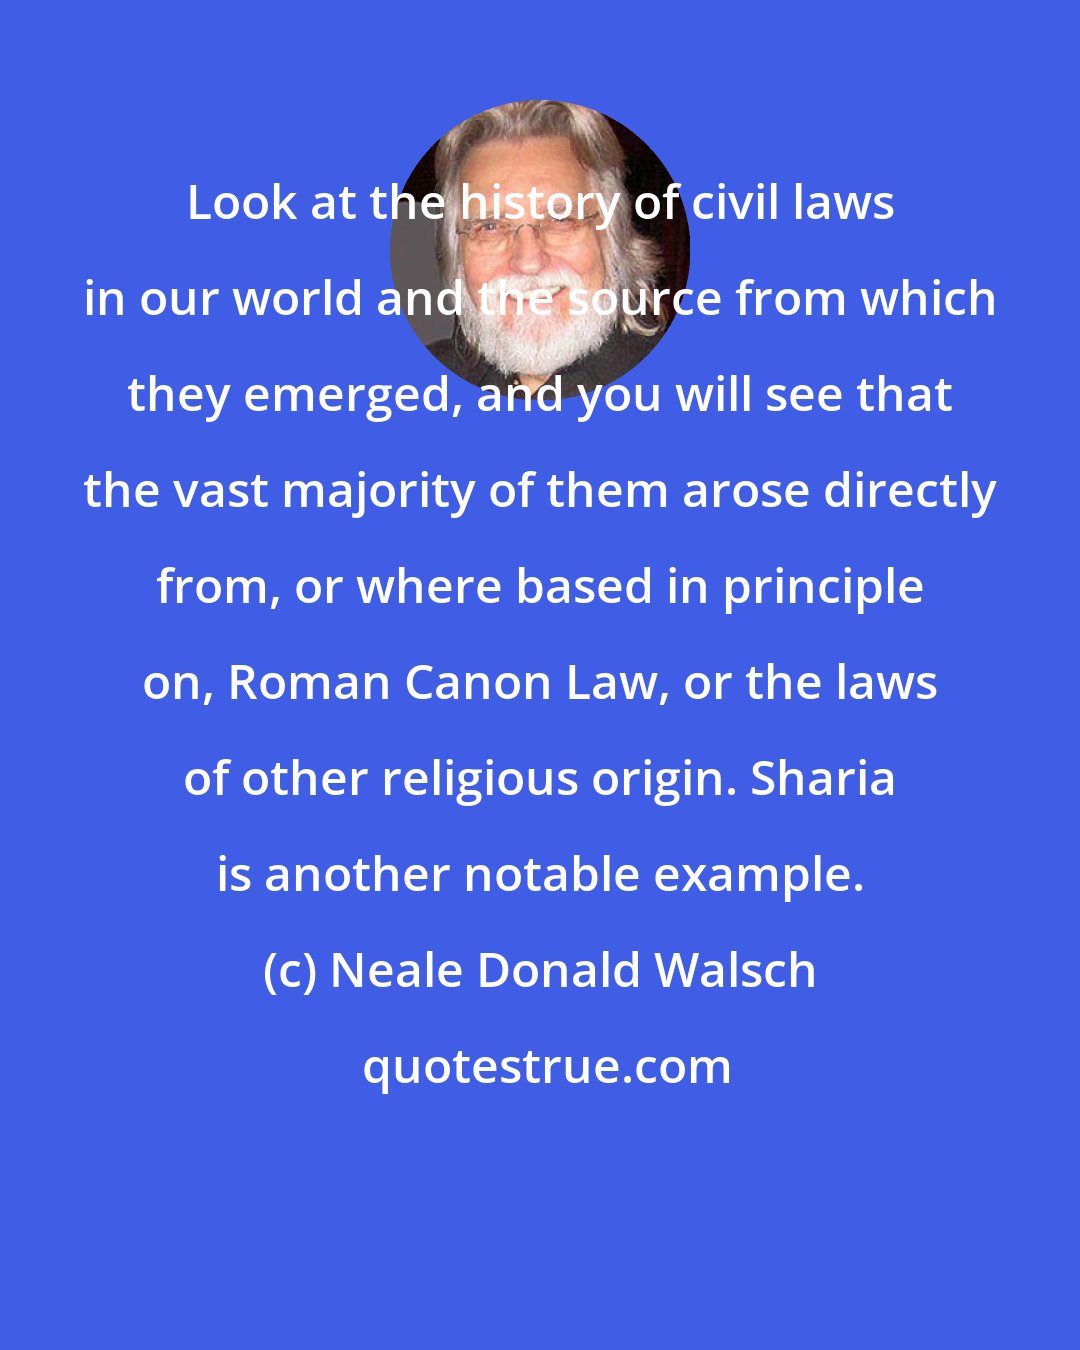 Neale Donald Walsch: Look at the history of civil laws in our world and the source from which they emerged, and you will see that the vast majority of them arose directly from, or where based in principle on, Roman Canon Law, or the laws of other religious origin. Sharia is another notable example.